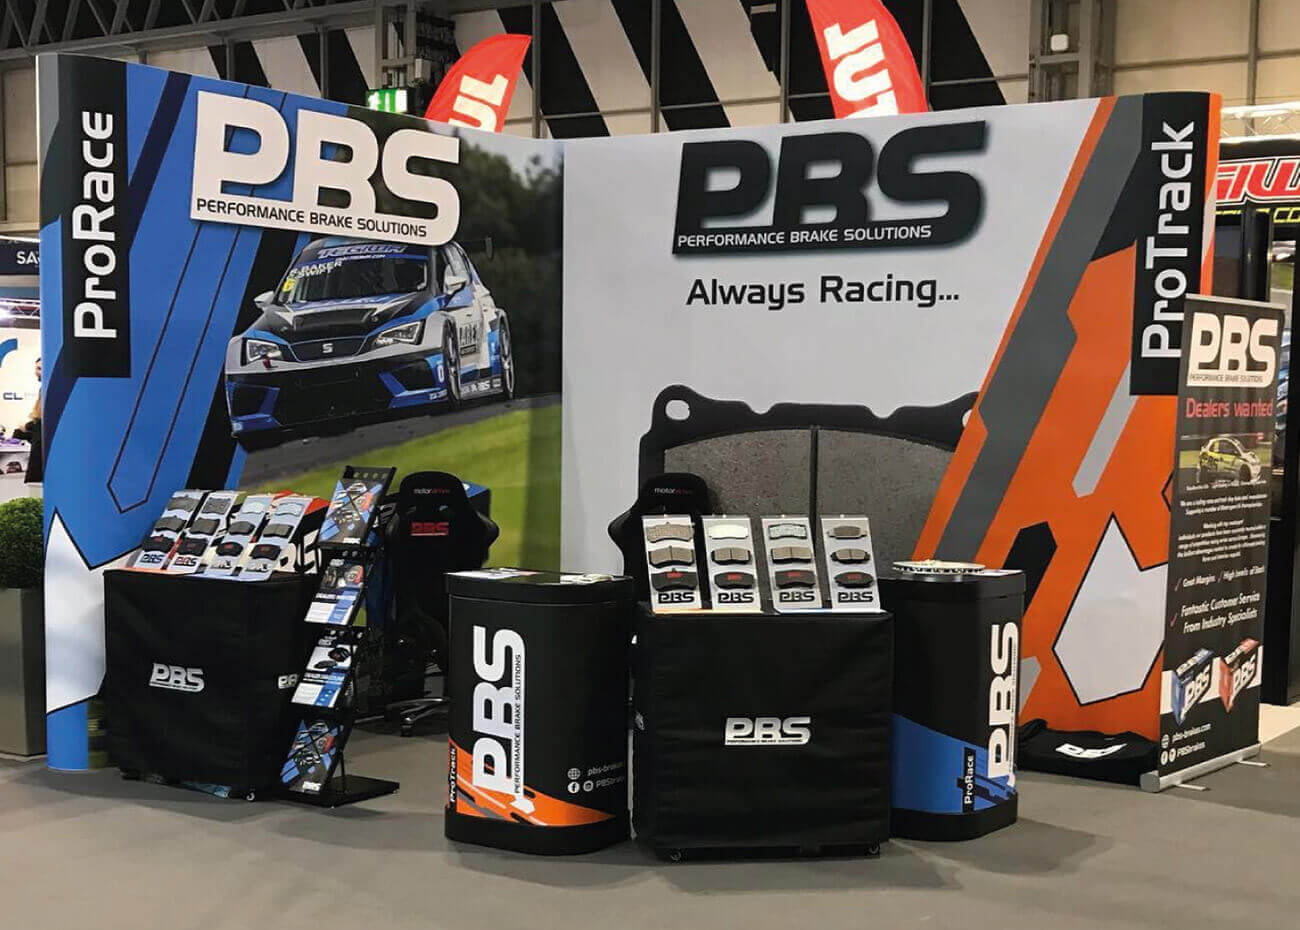 PBS Brakes show stand